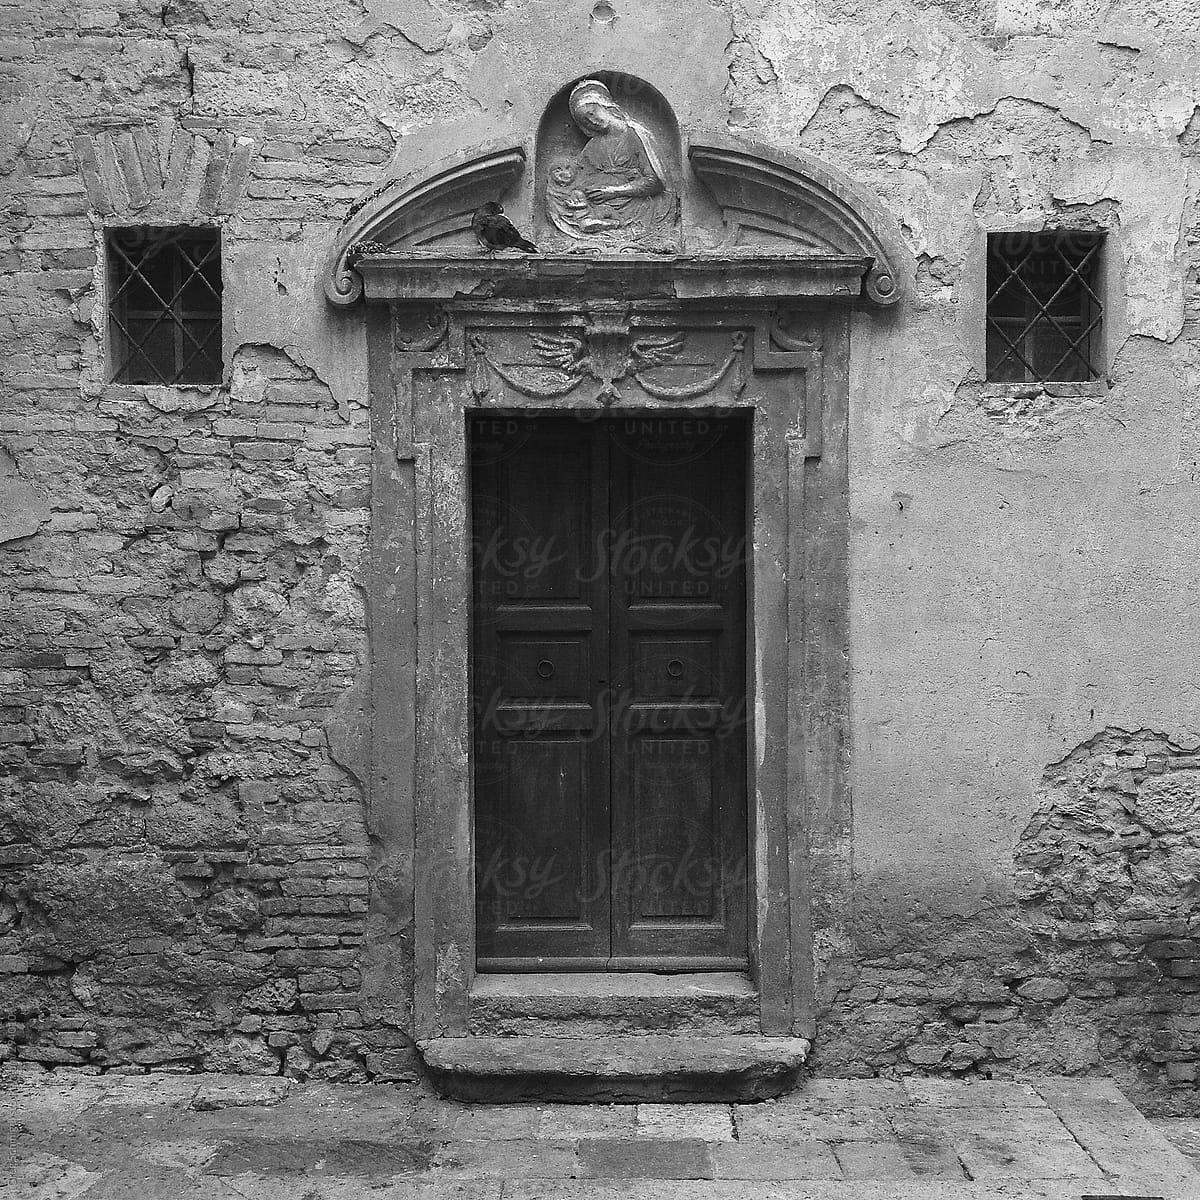 Black and white image of village streets in the historic Tuscany village of San Gimignano, Italy